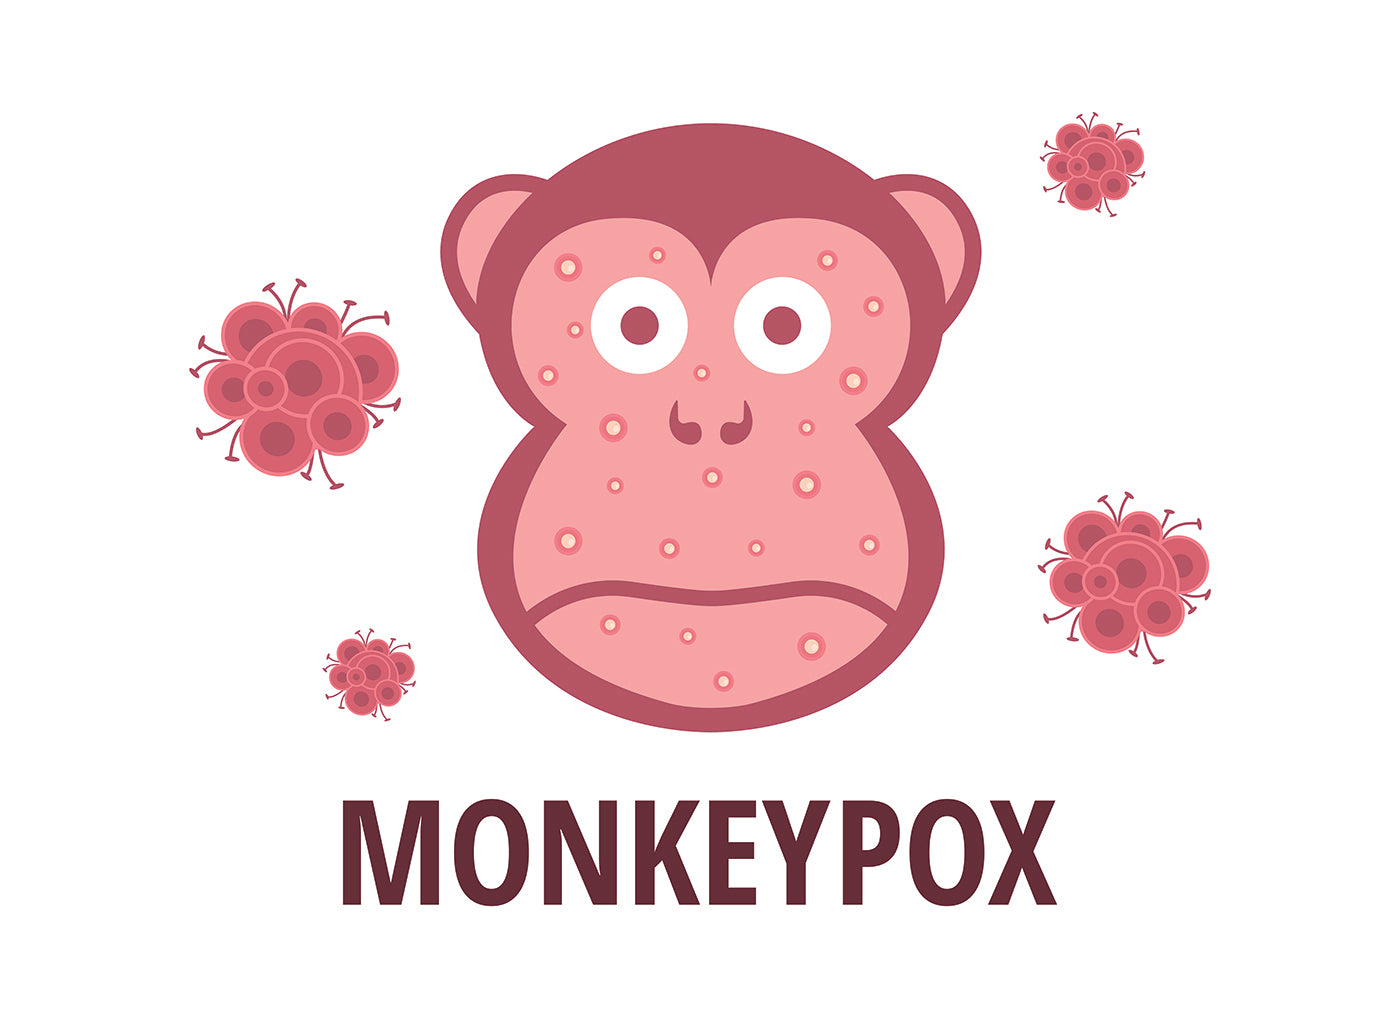 Monkeypox: What you need to know as a parent